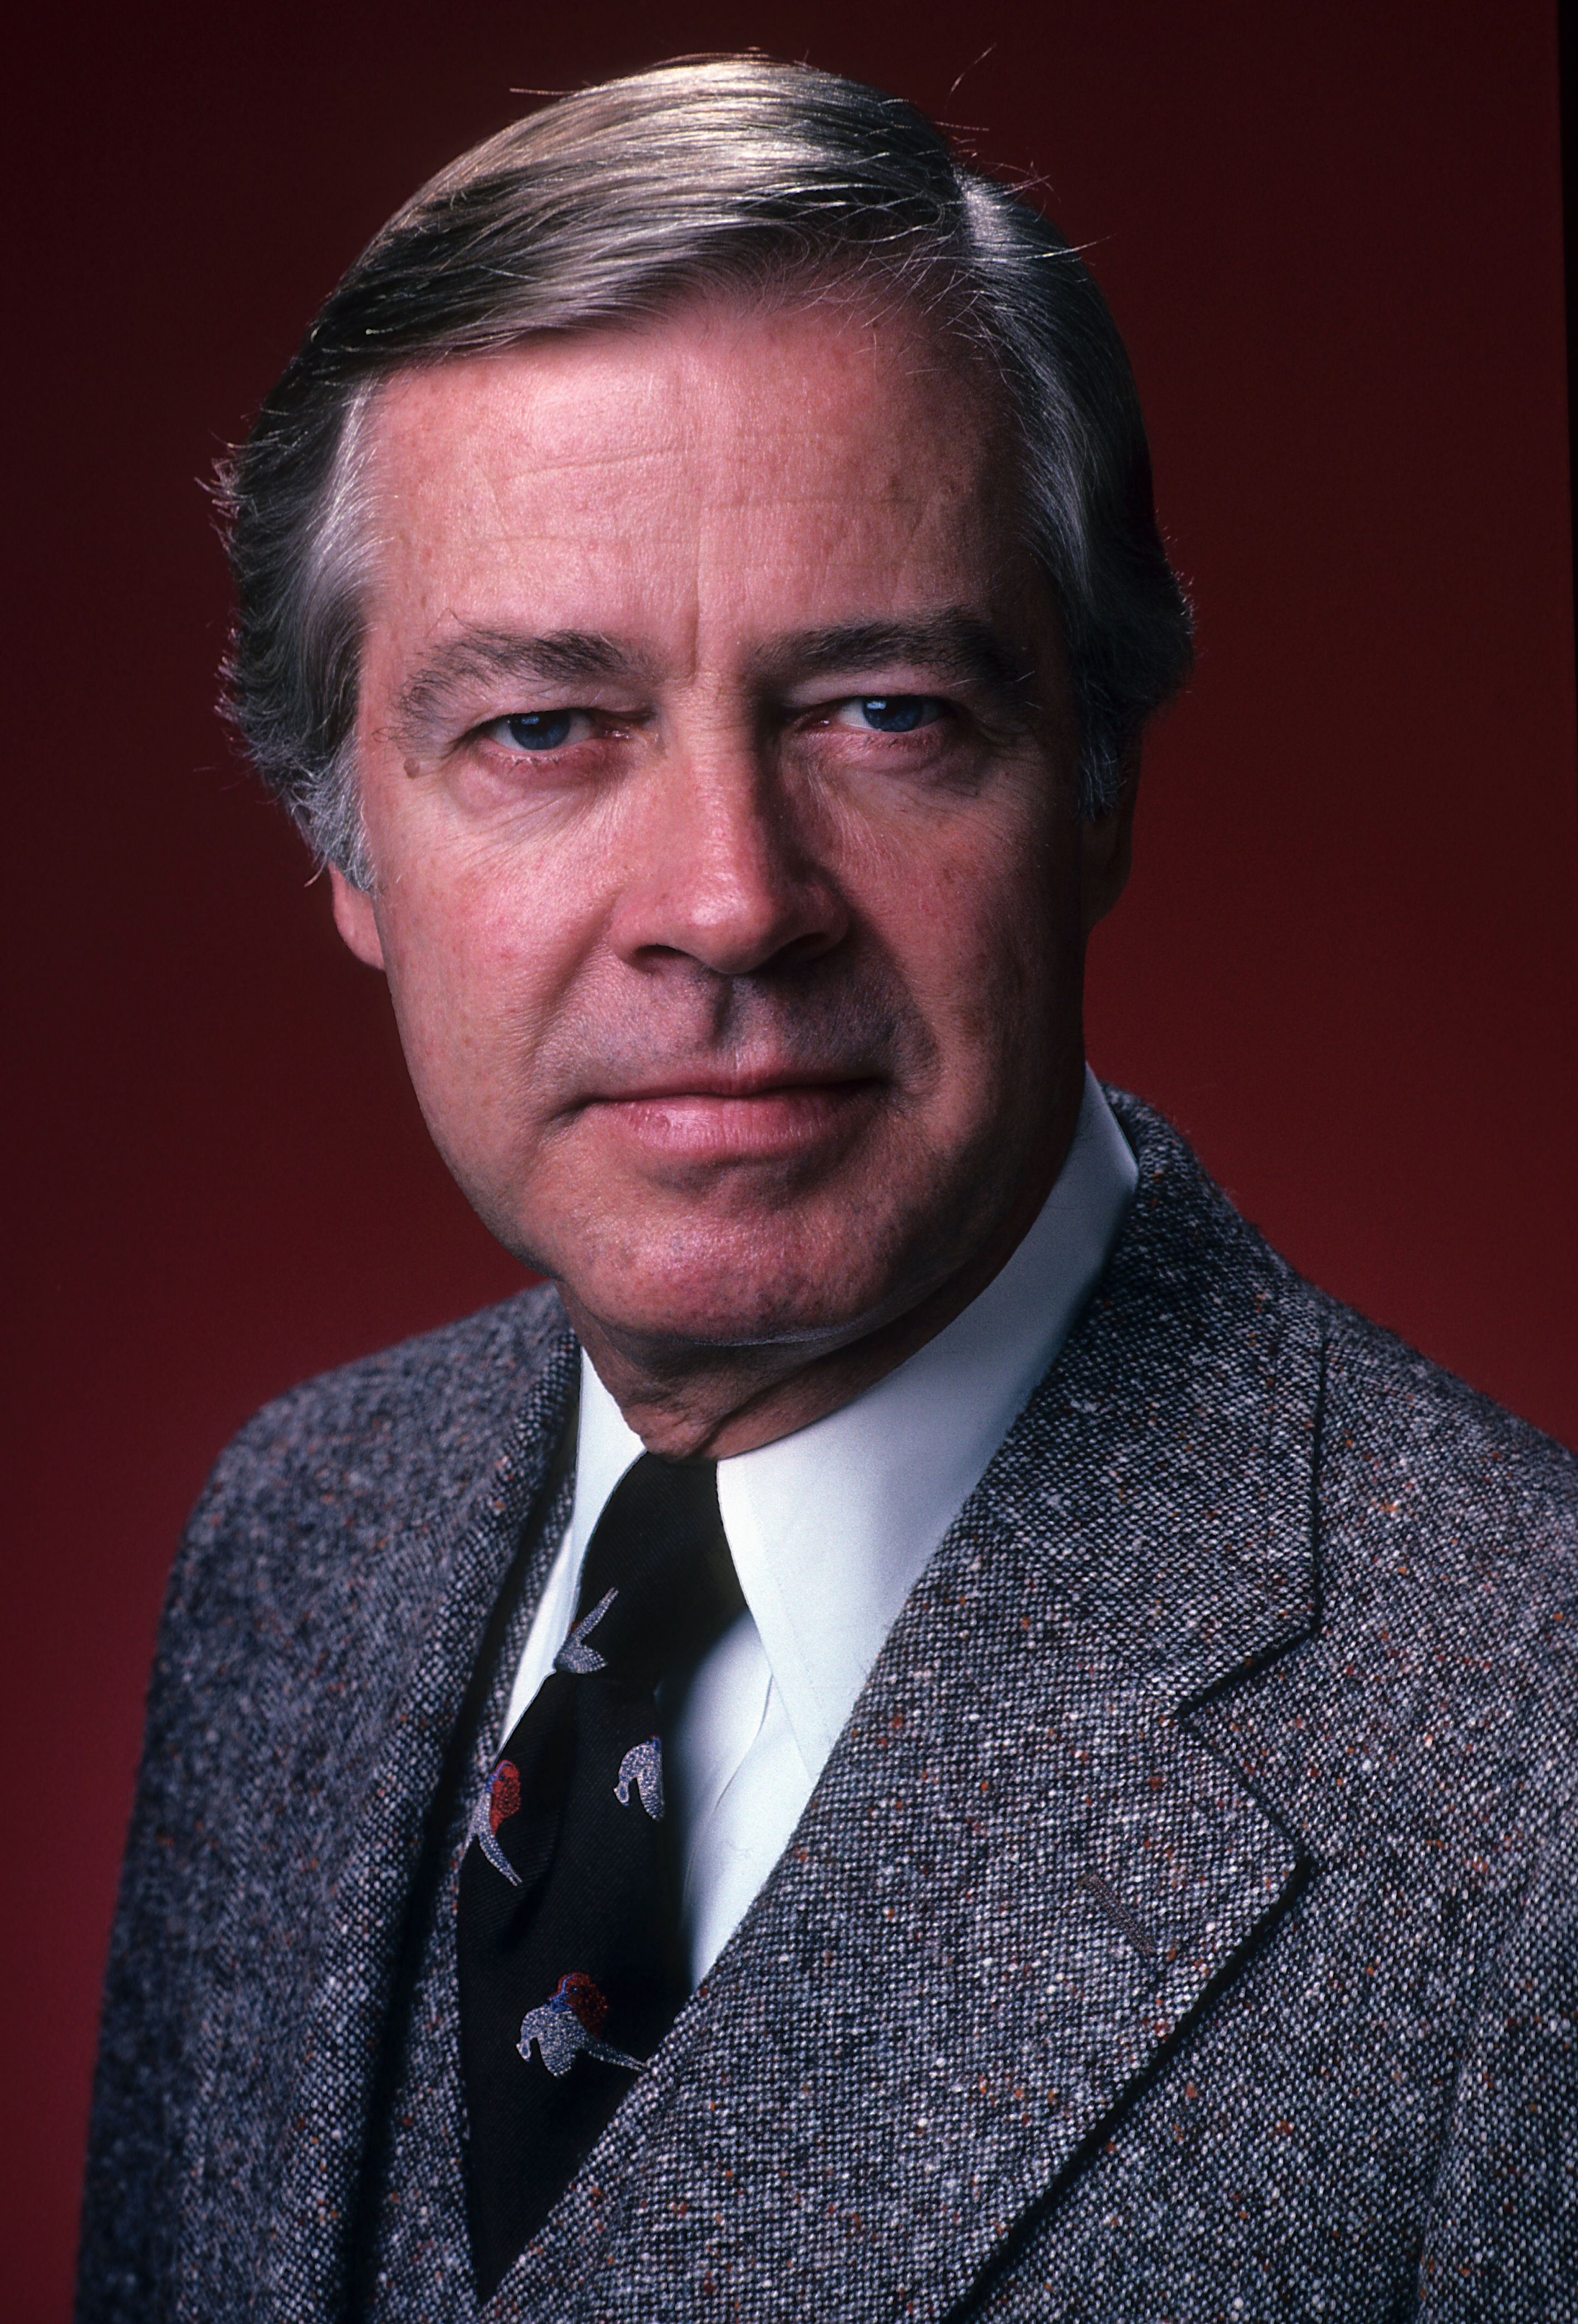 <p>Actor Forrest Compton, who was best known for his work on the soap opera "Edge of the Night," died on April 5 from complications related to COVID-19. He was 94. He also appeared in 1961's "The Outsider" and 1991's "McBain."</p>